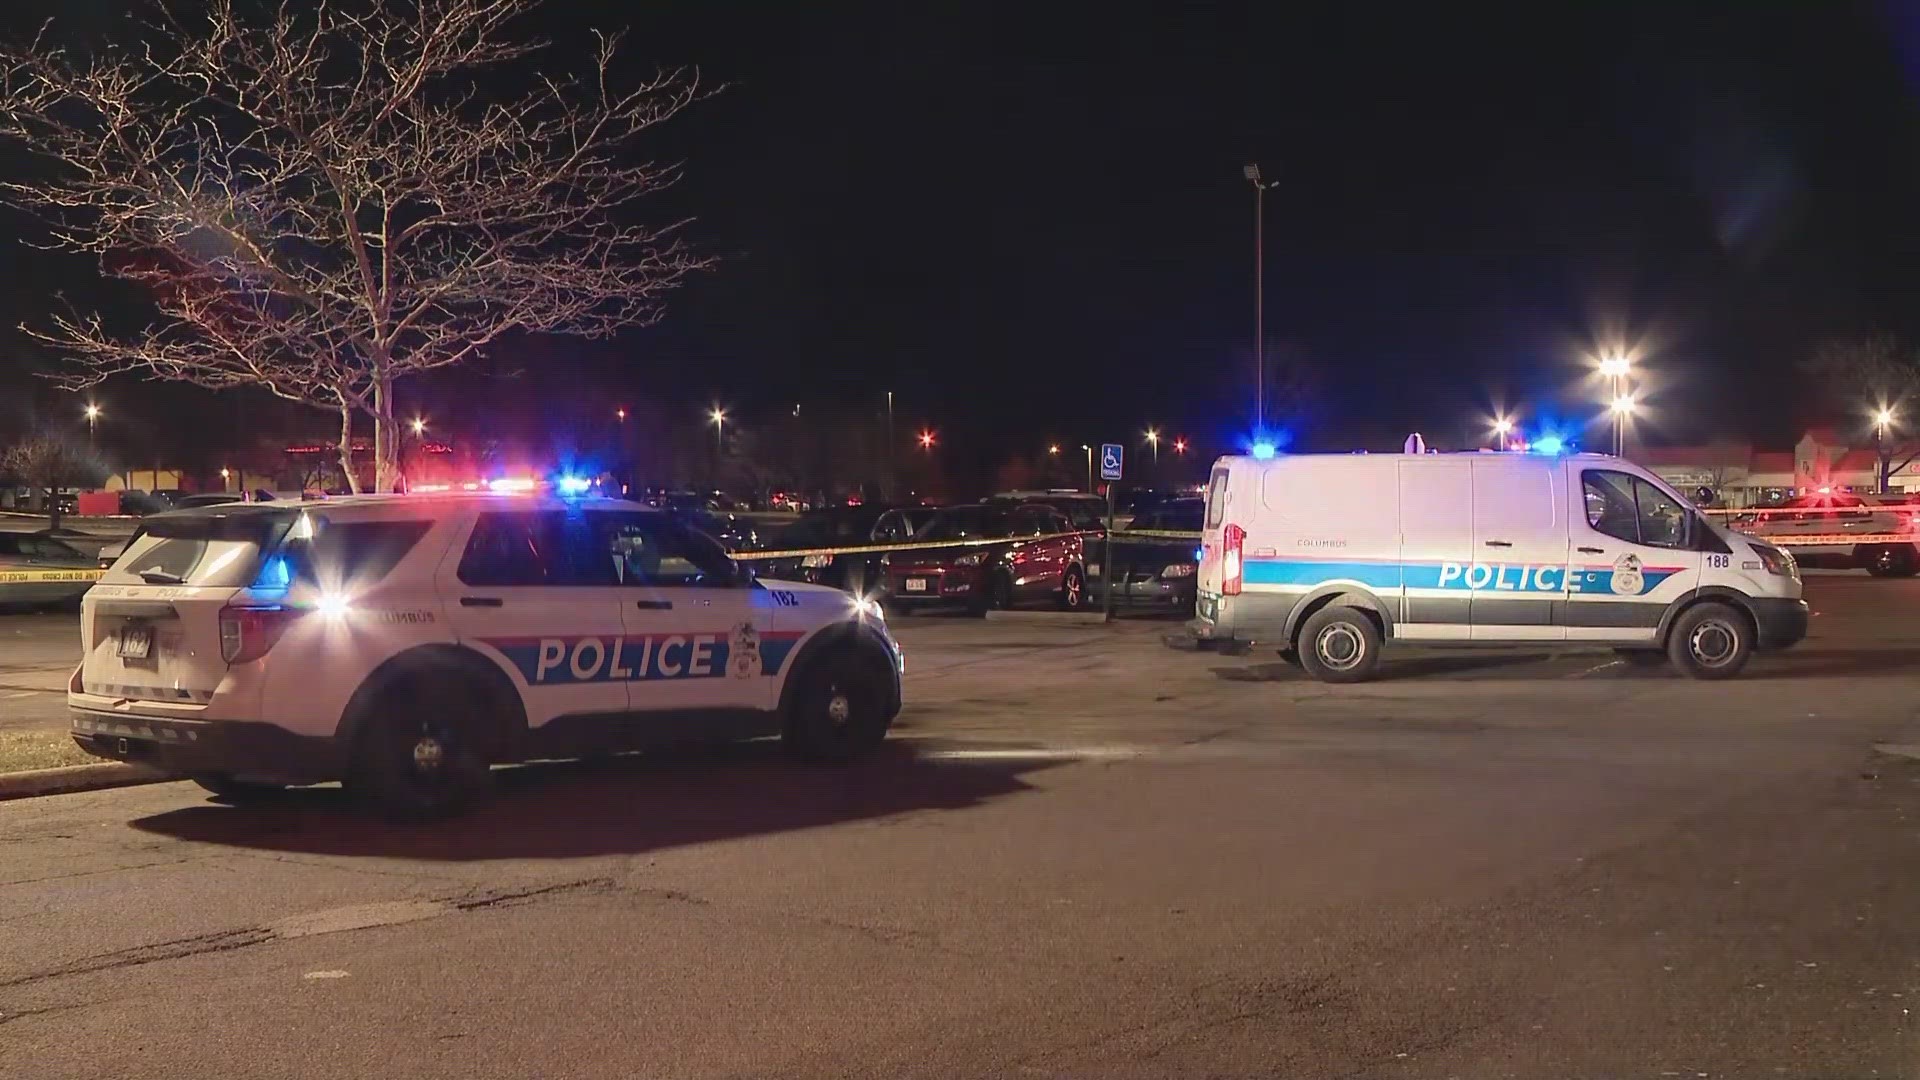 One person was shot during the fight and police describe their condition as "stable."